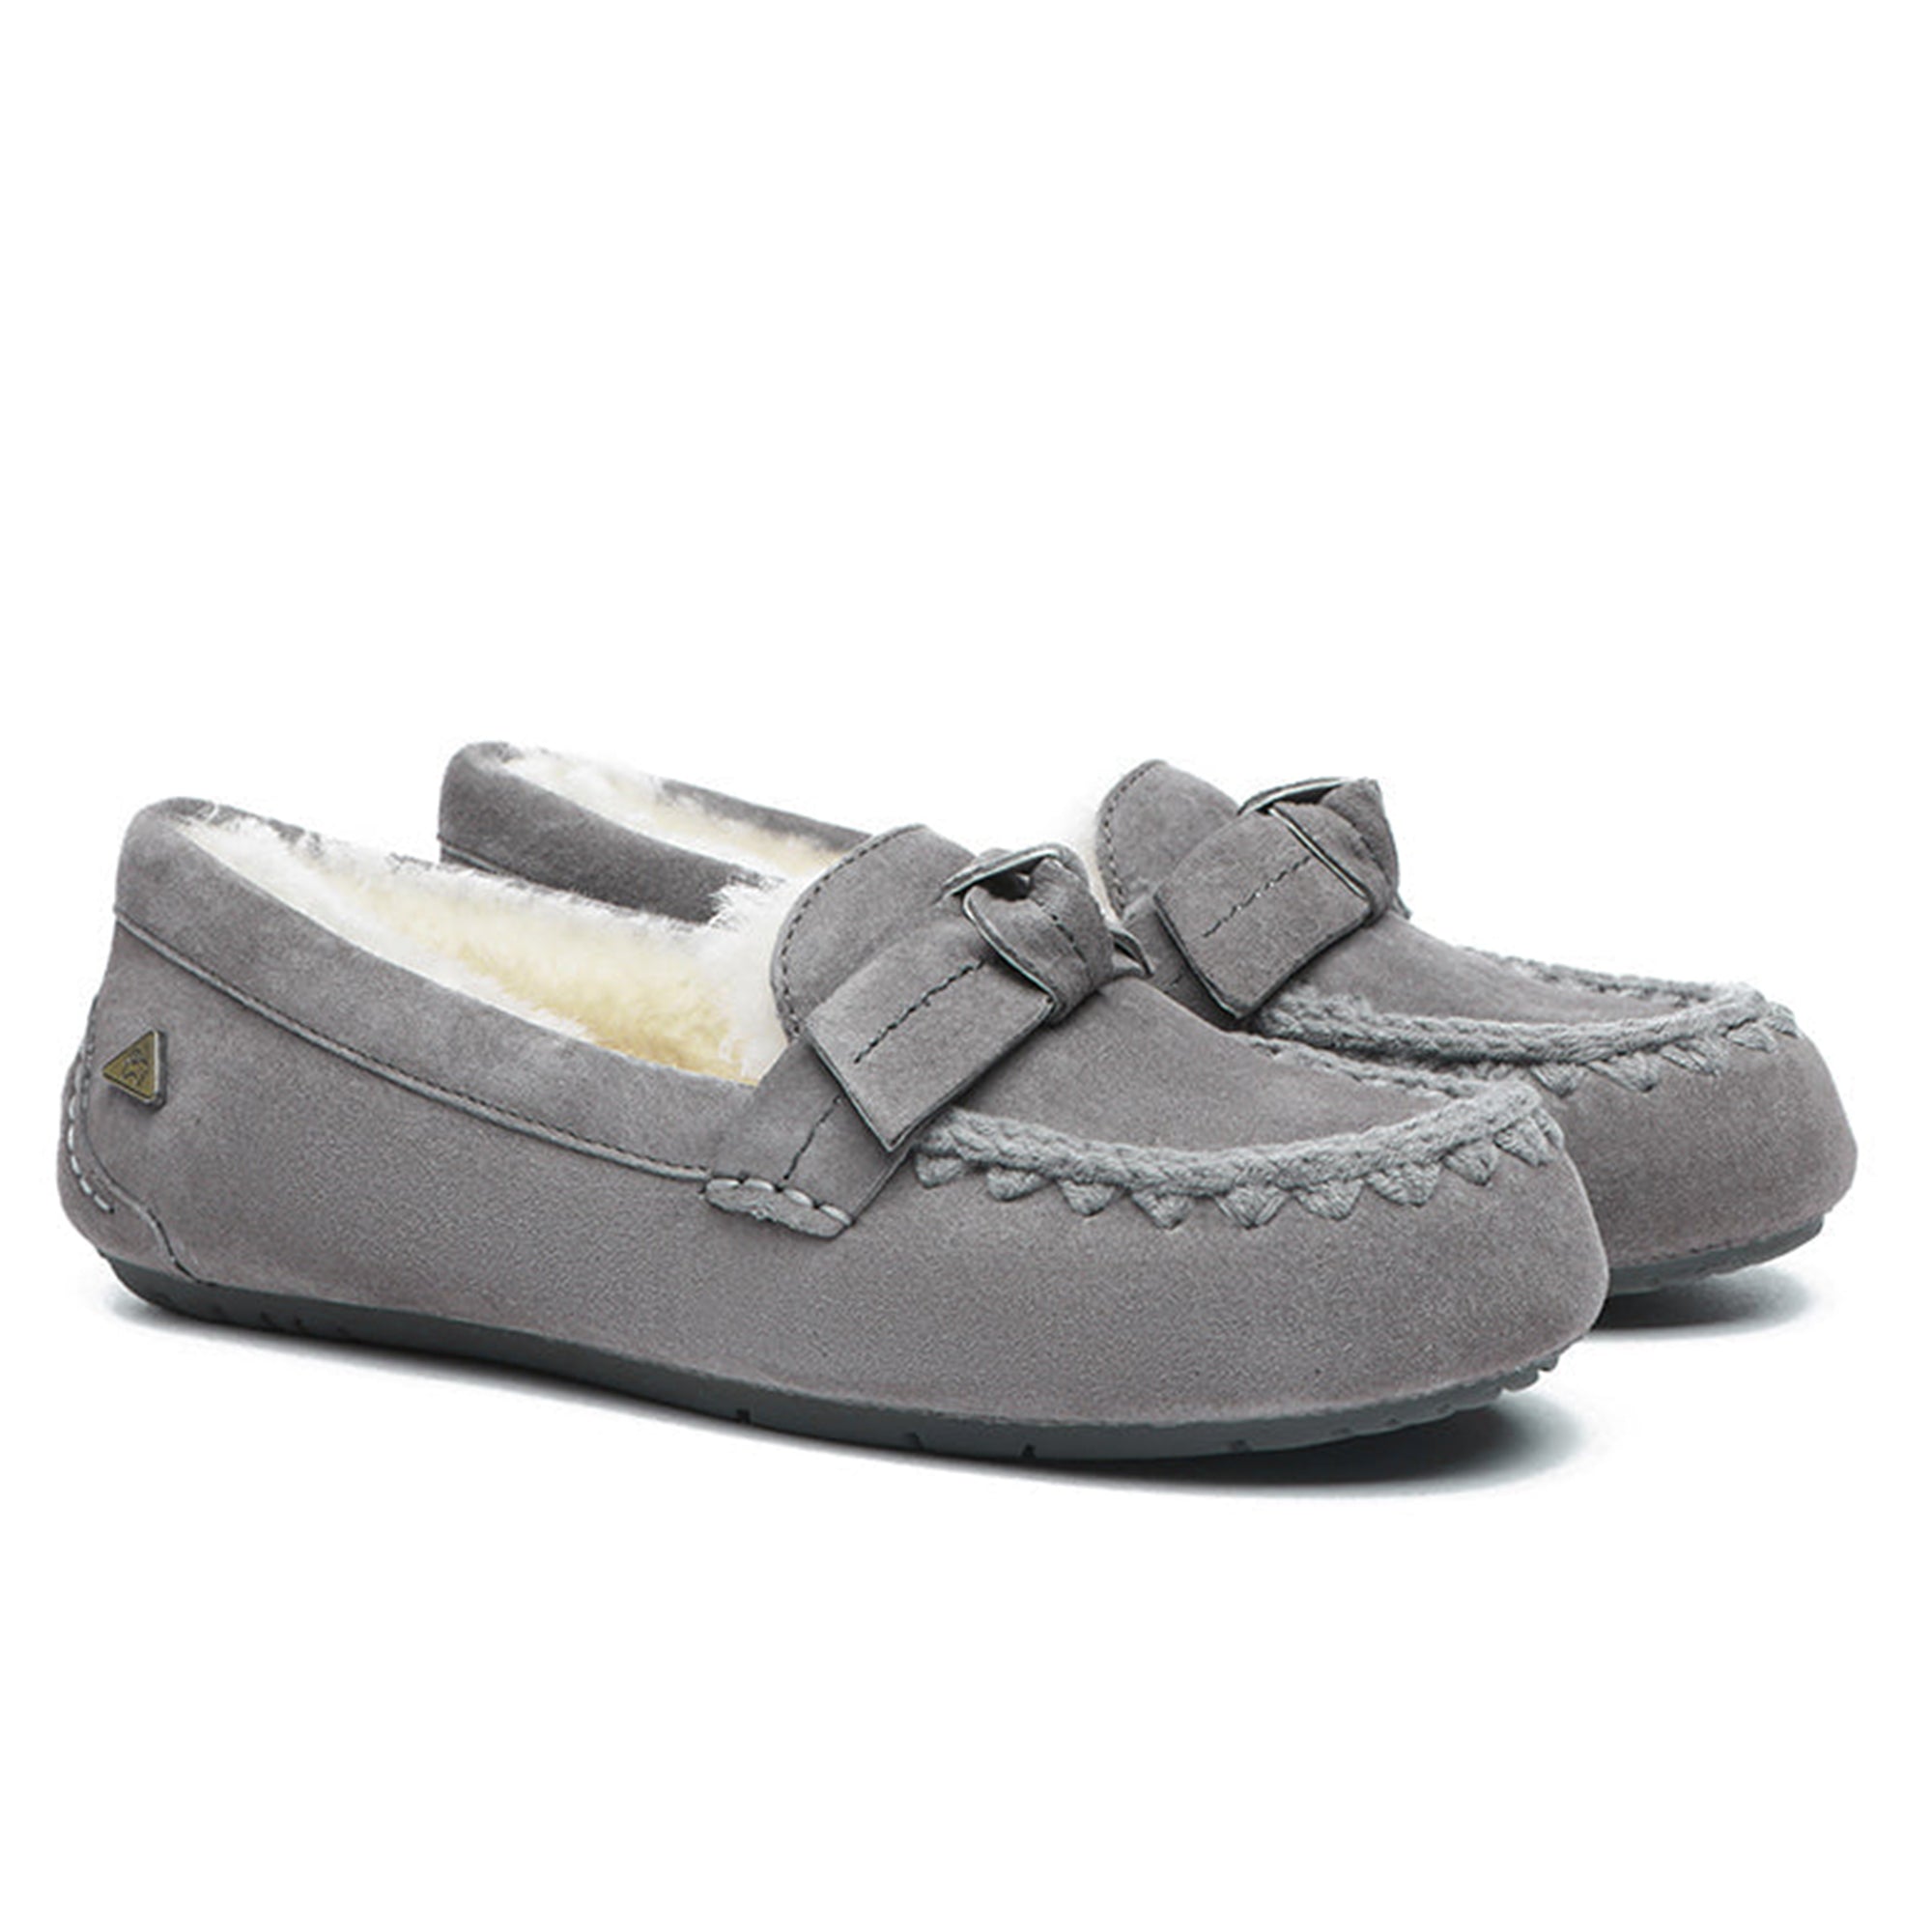 UGG Woven Bow Moccasin